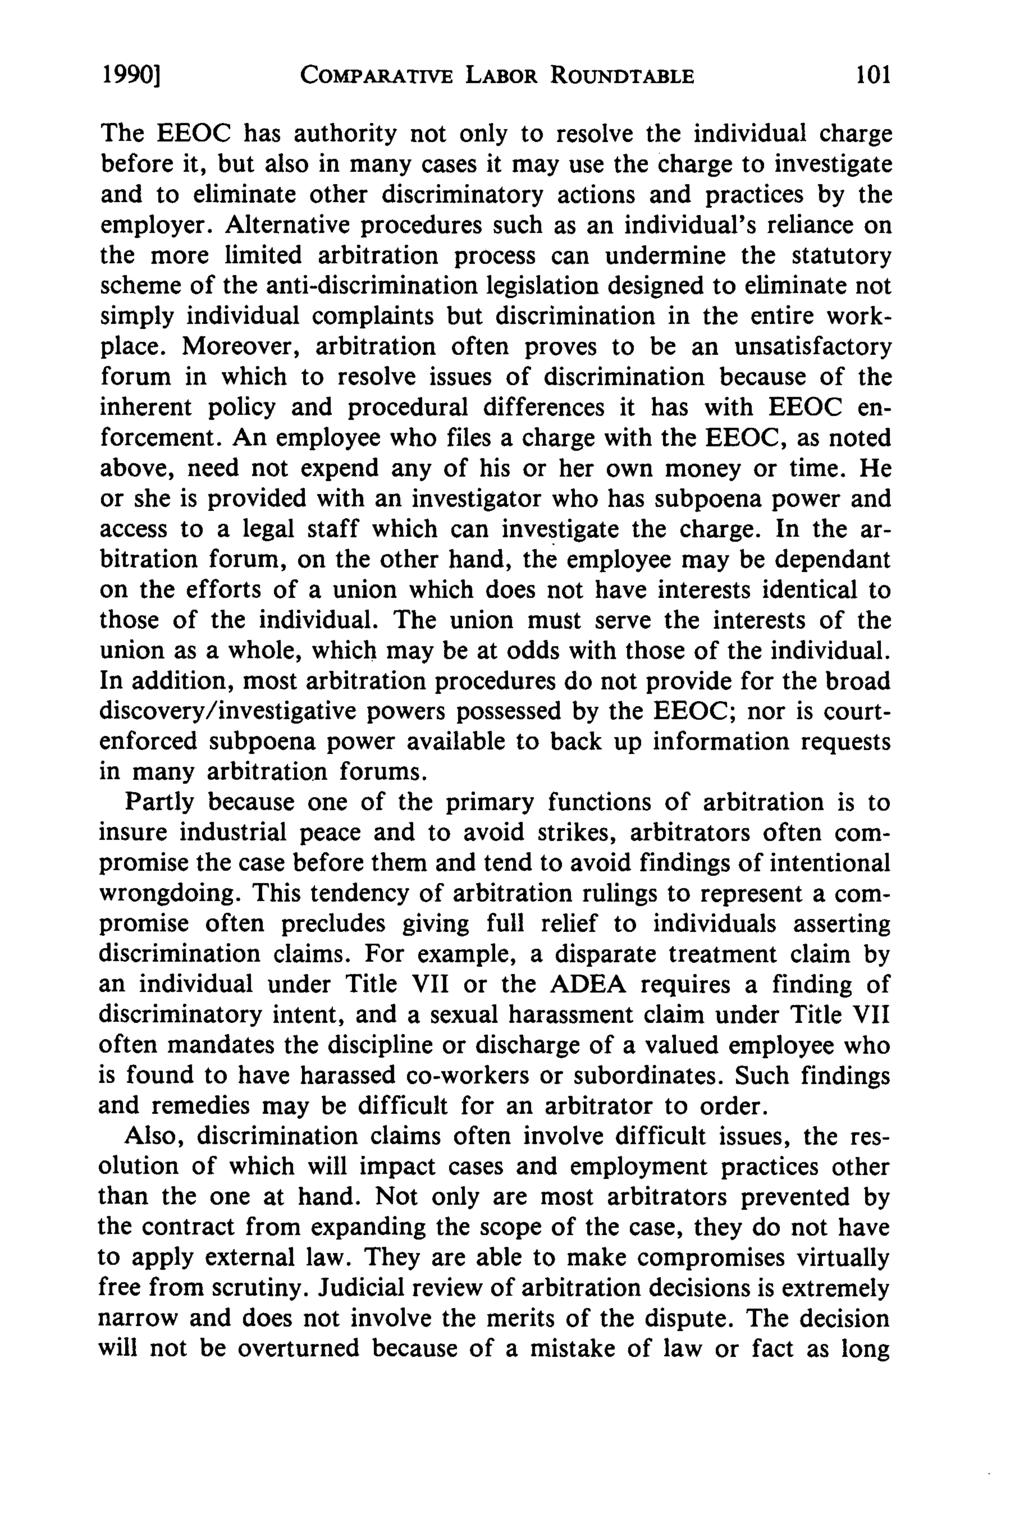 1990] COMPARATIVE LABOR ROUNDTABLE The EEOC has authority not only to resolve the individual charge before it, but also in many cases it may use the charge to investigate and to eliminate other